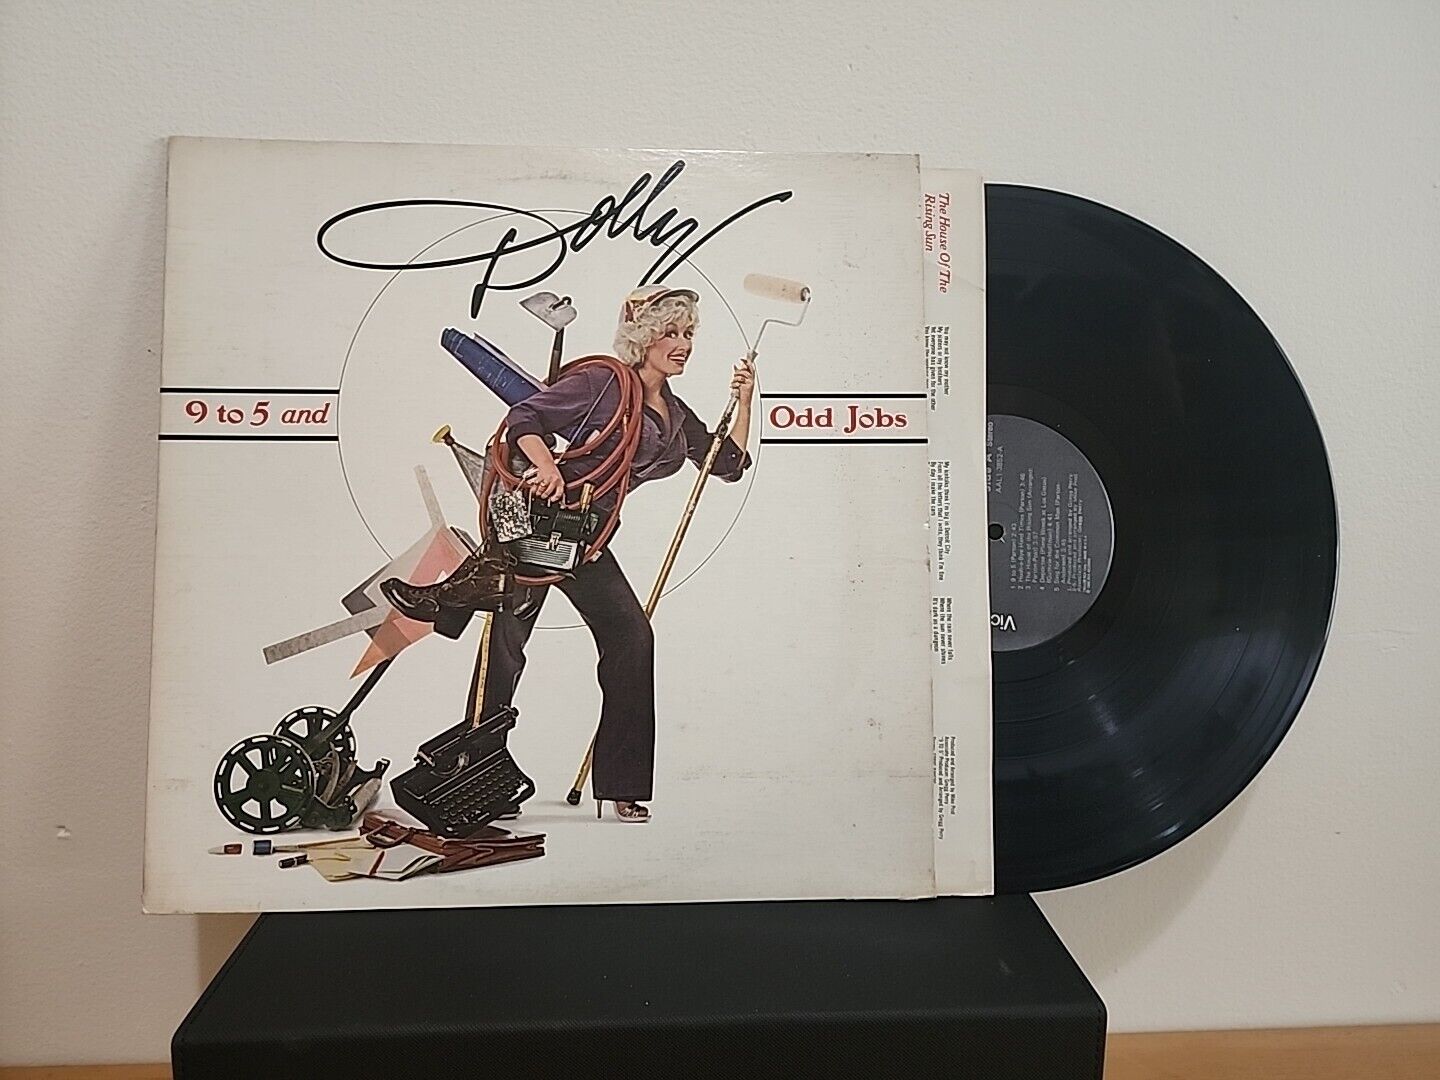 Dolly Parton, 9 to 5 and Odd Jobs, 1980 RCA Victor AAL1-3852 Country